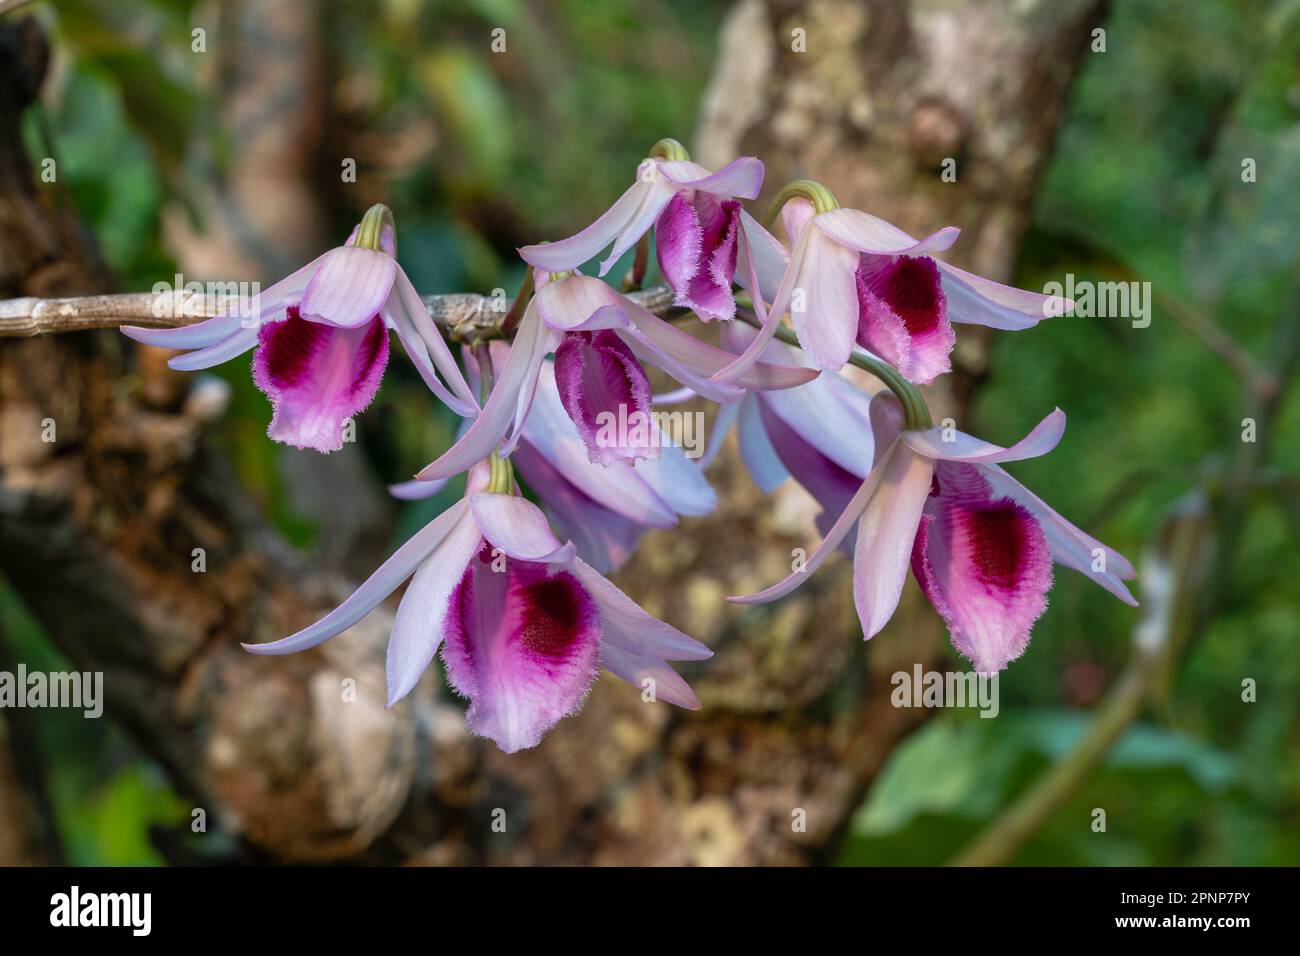 Closeup view of colorful pink and purple flowers of epiphytic tropical orchid species dendrobium anosmum blooming outdoors on natural background Stock Photo